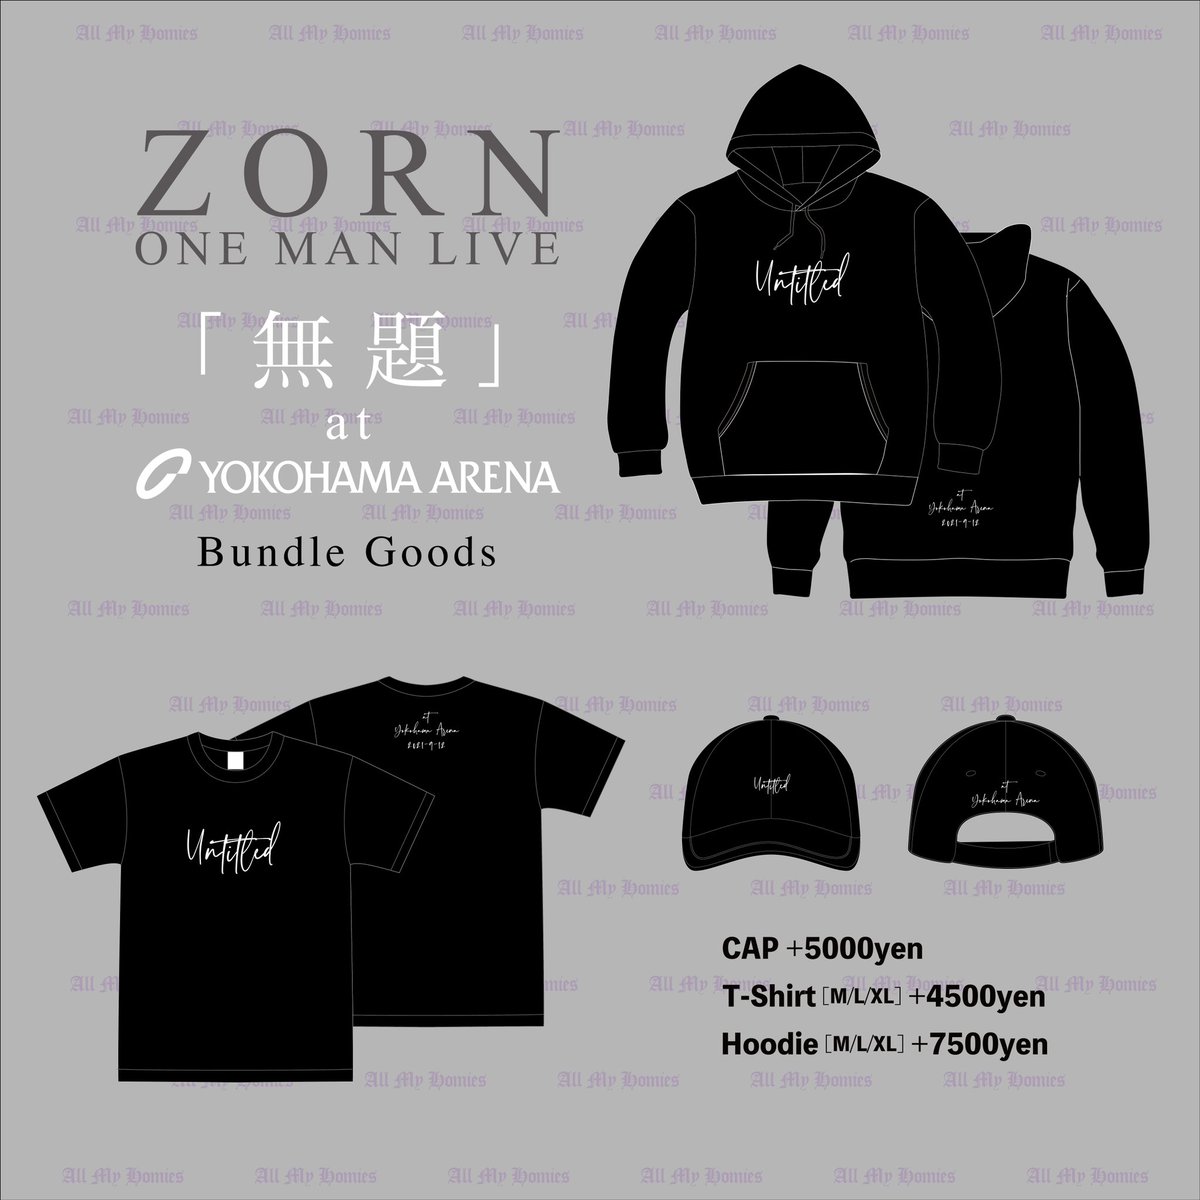 ZORN パーカー 横浜アリーナ グッズ 限定 XL WHITE 【新品未使用